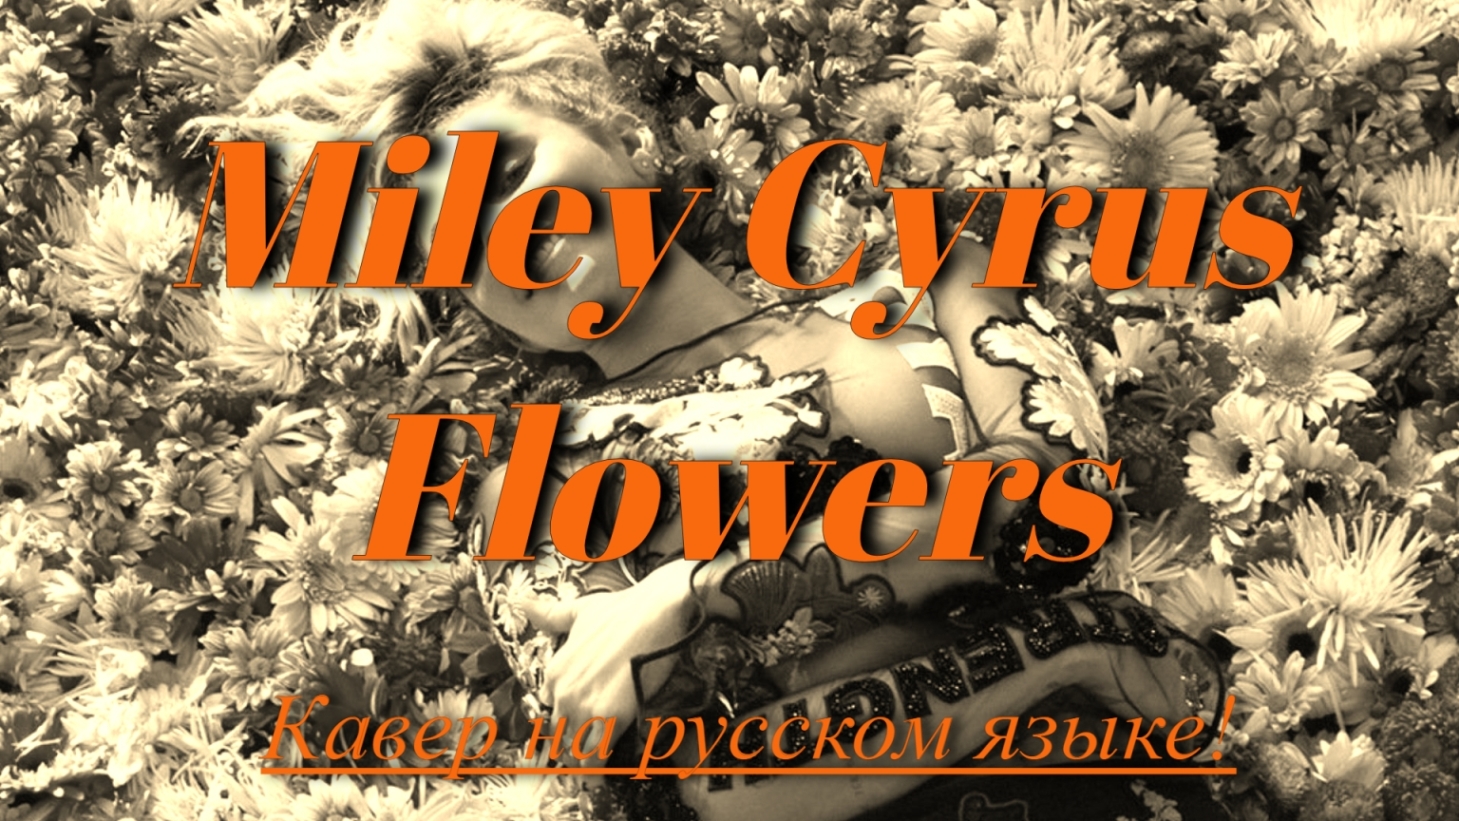 Miley Cyrus - Flowers (cover на русском)